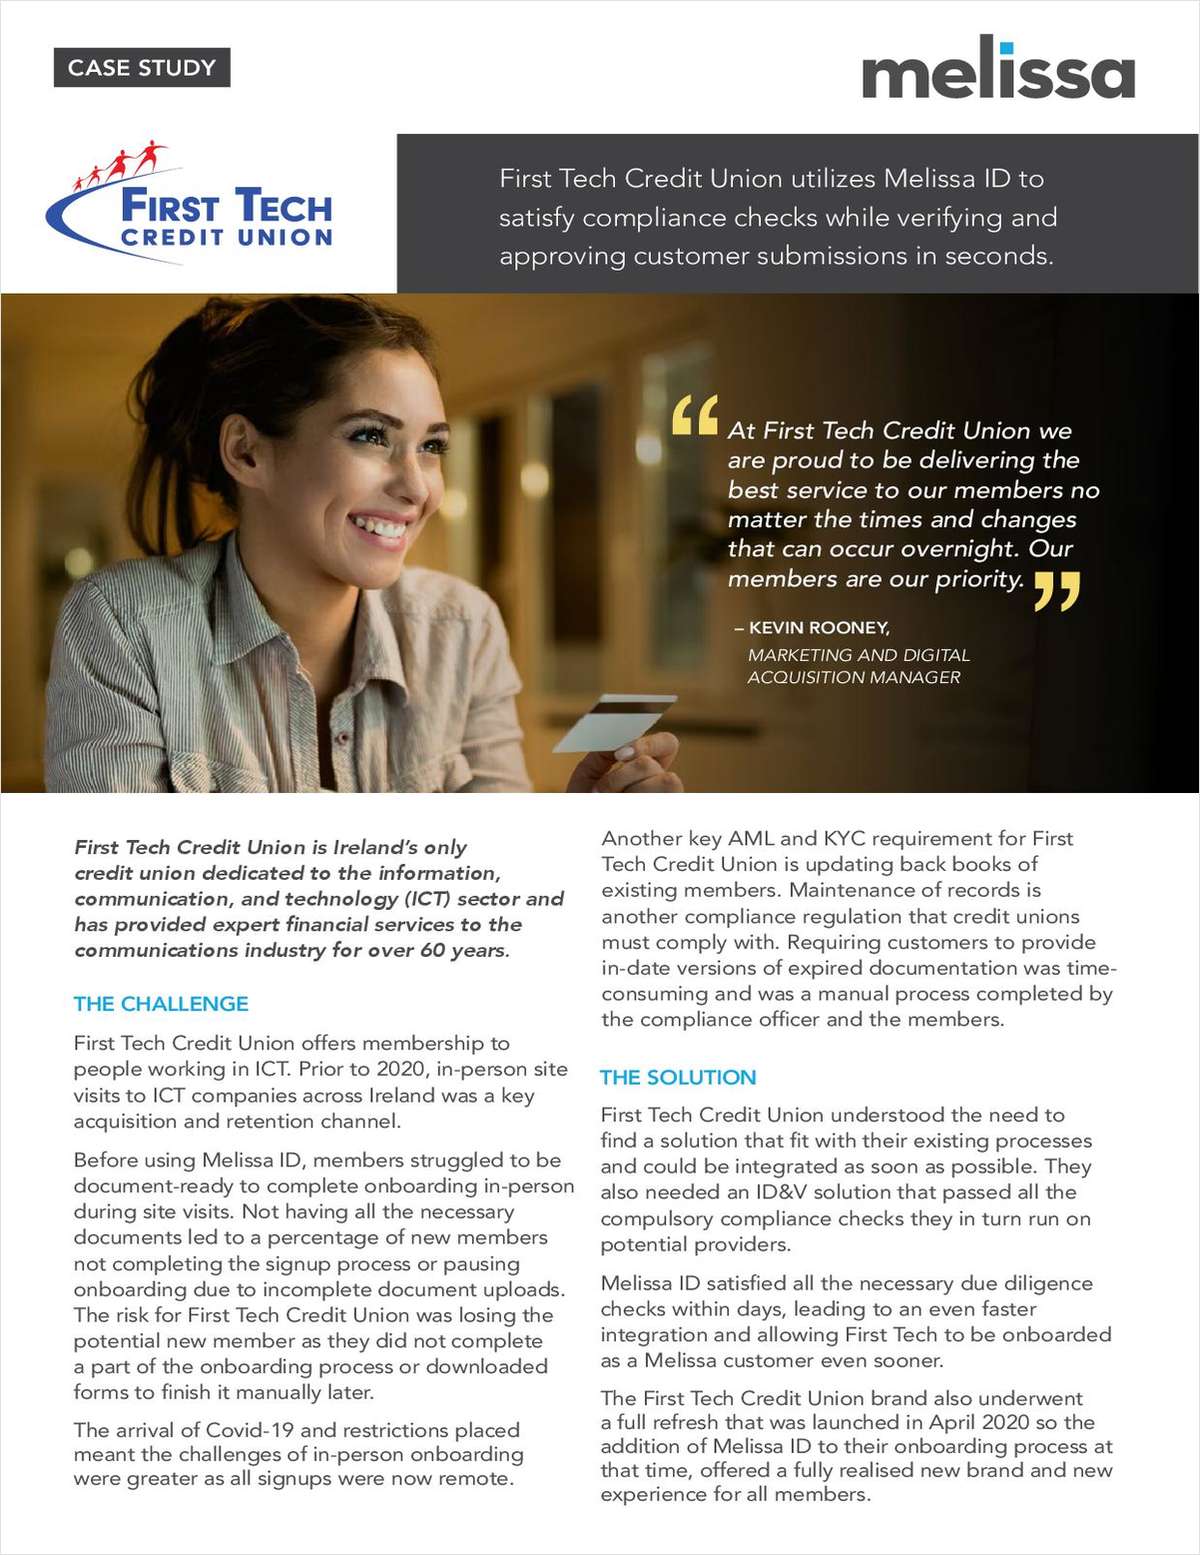 Case Study: First Tech Credit Union Satisfies Compliance Checks While Verifying and Approving Customer Submissions in Seconds link